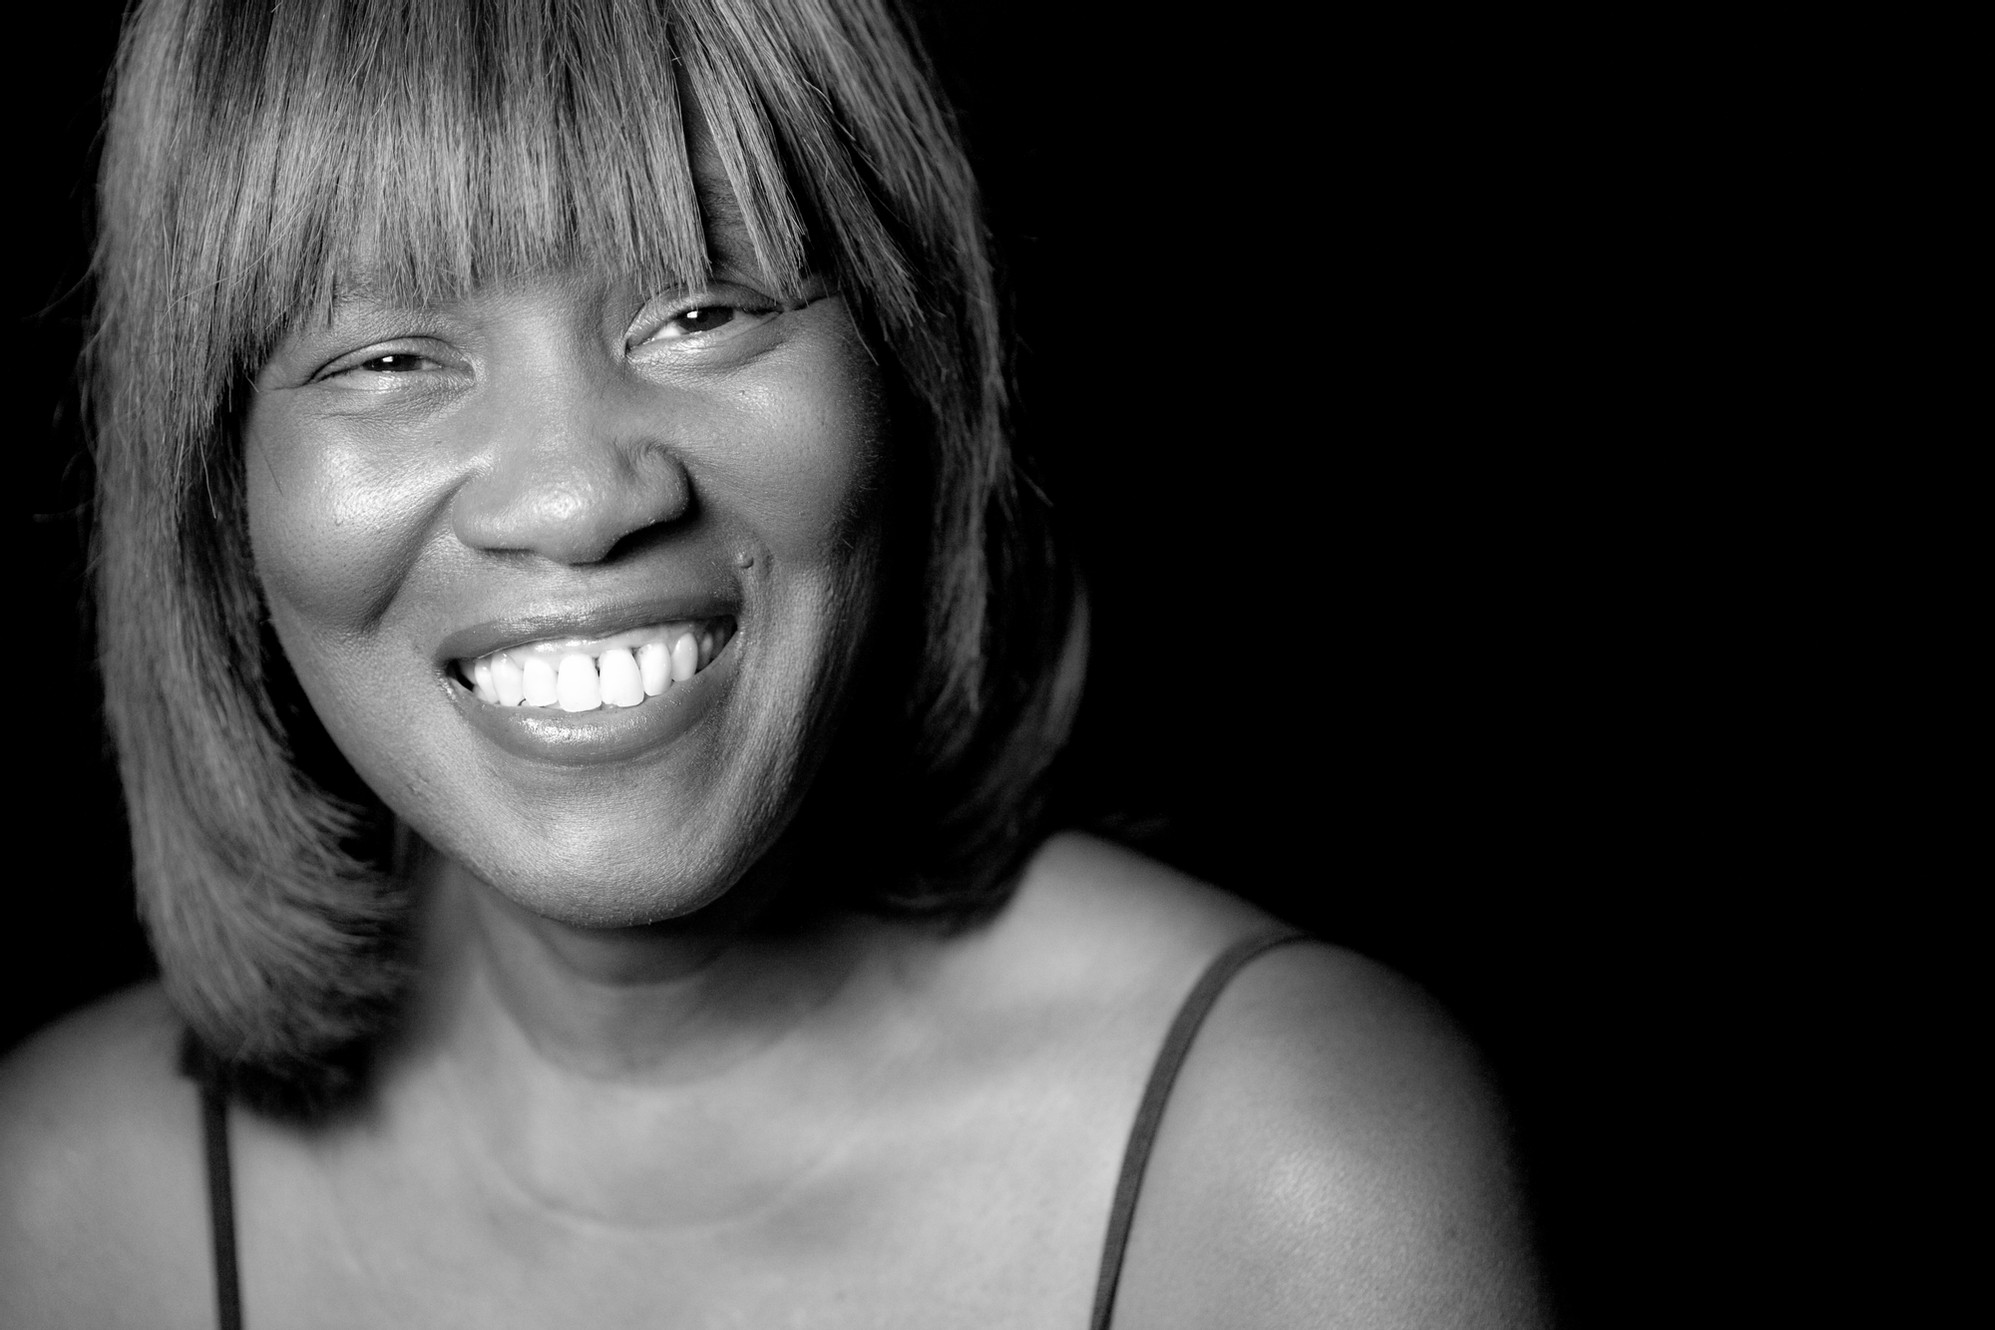 patricia smith smiles warmly at you as if you had just surprised her in the best way